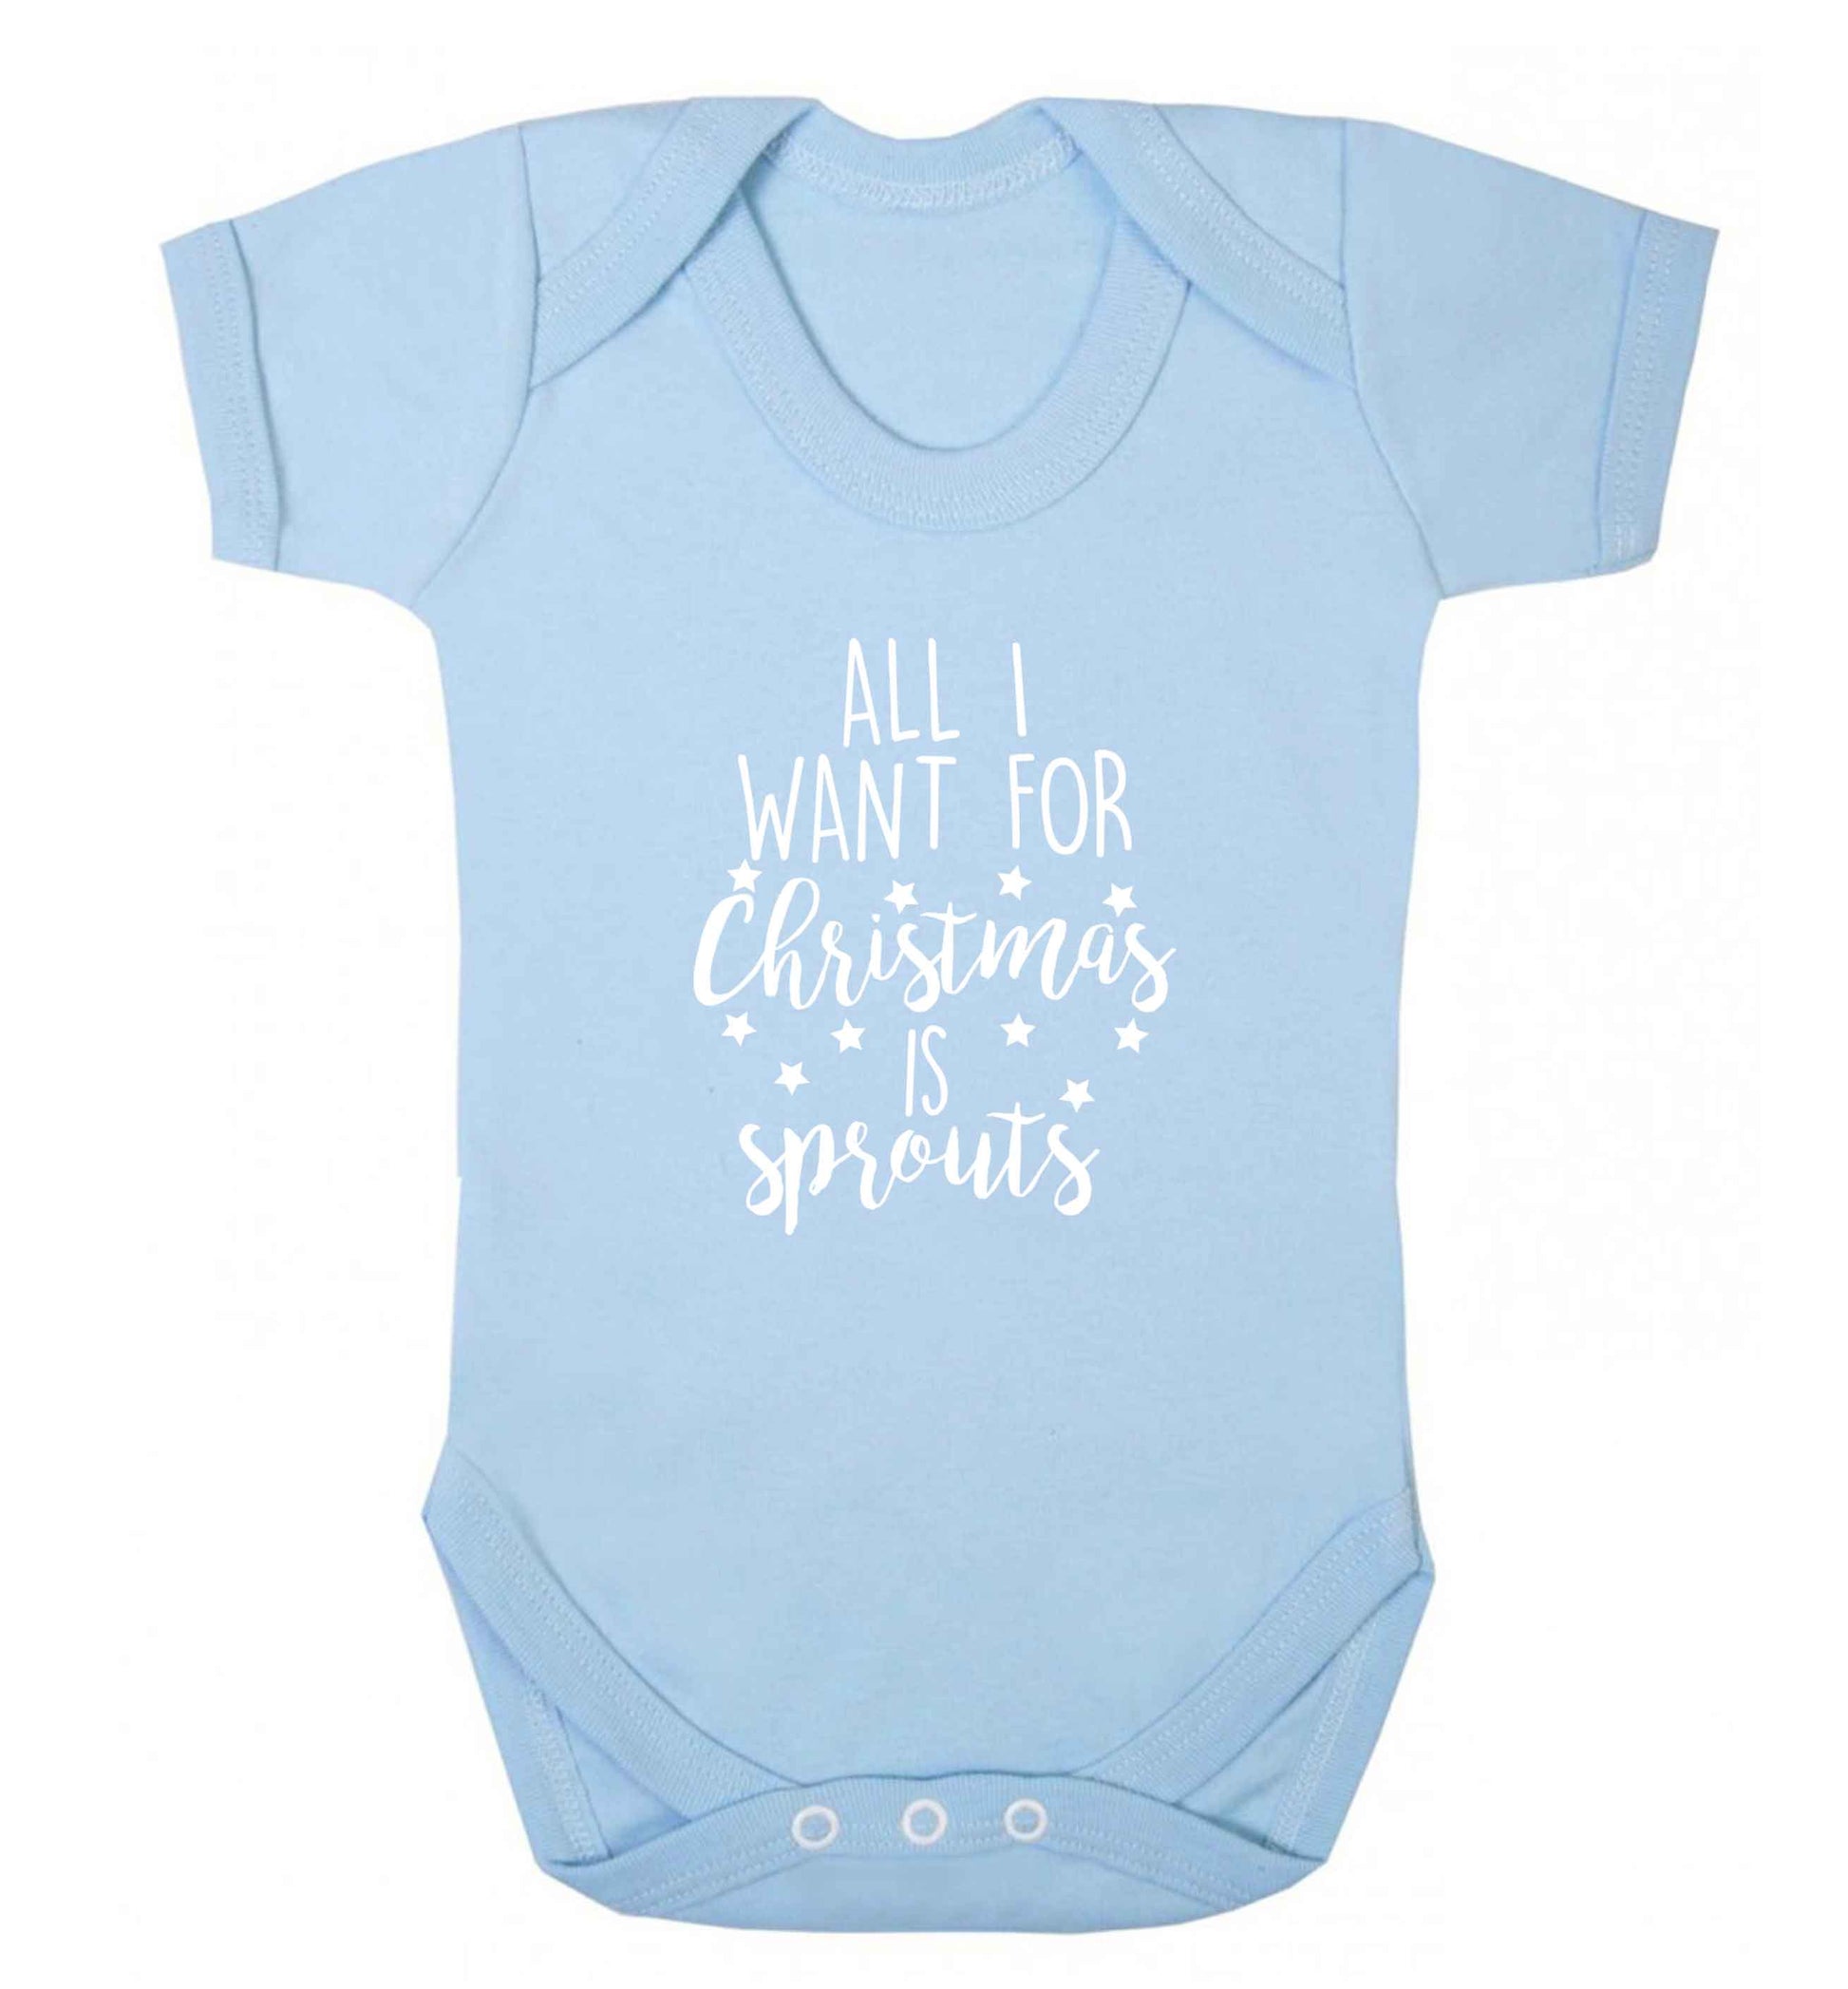 All I want for Christmas is sprouts baby vest pale blue 18-24 months